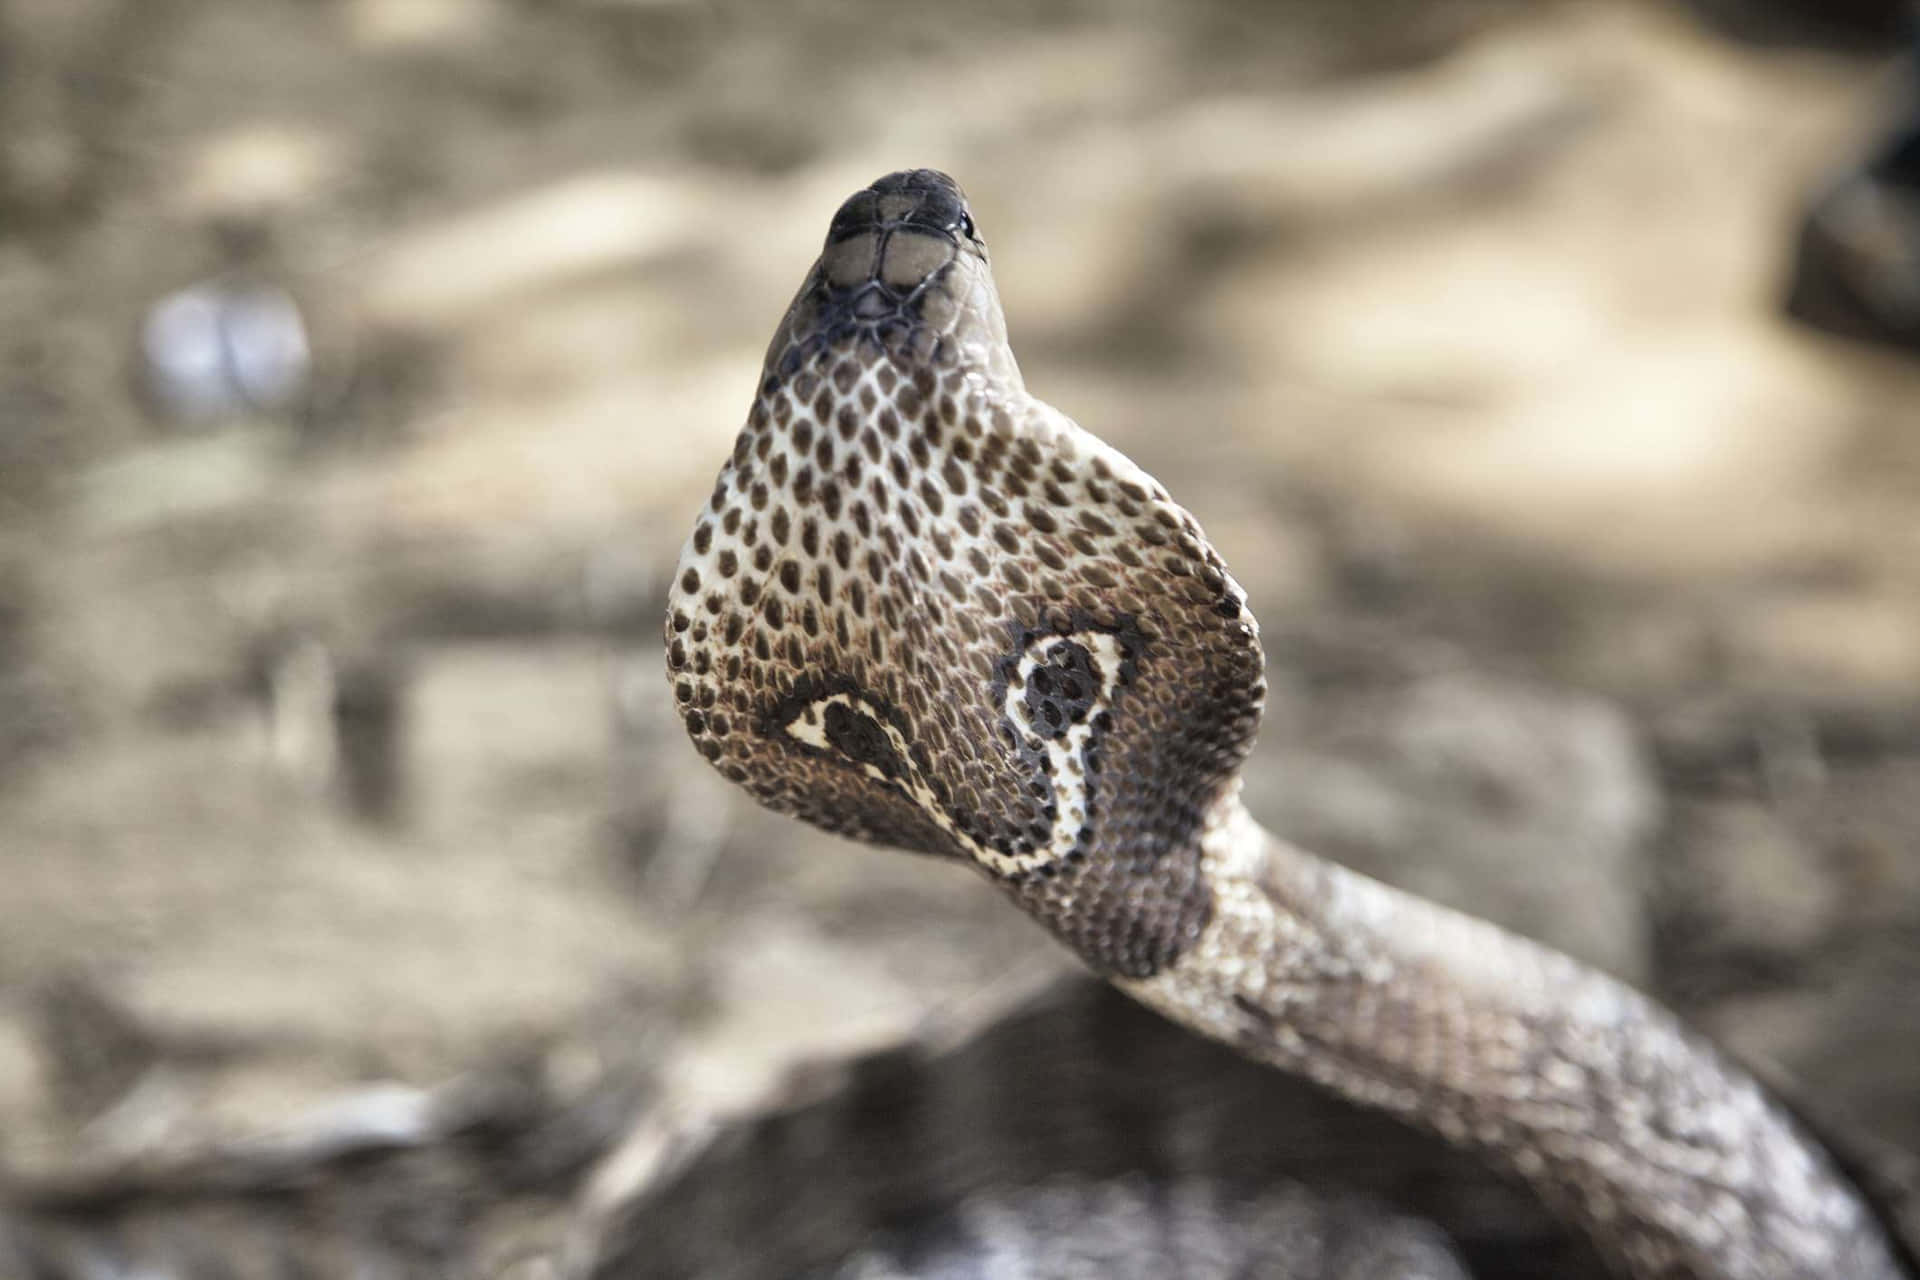 A thick, black-and-brown King Cobra peers directly into the camera, ready to strike